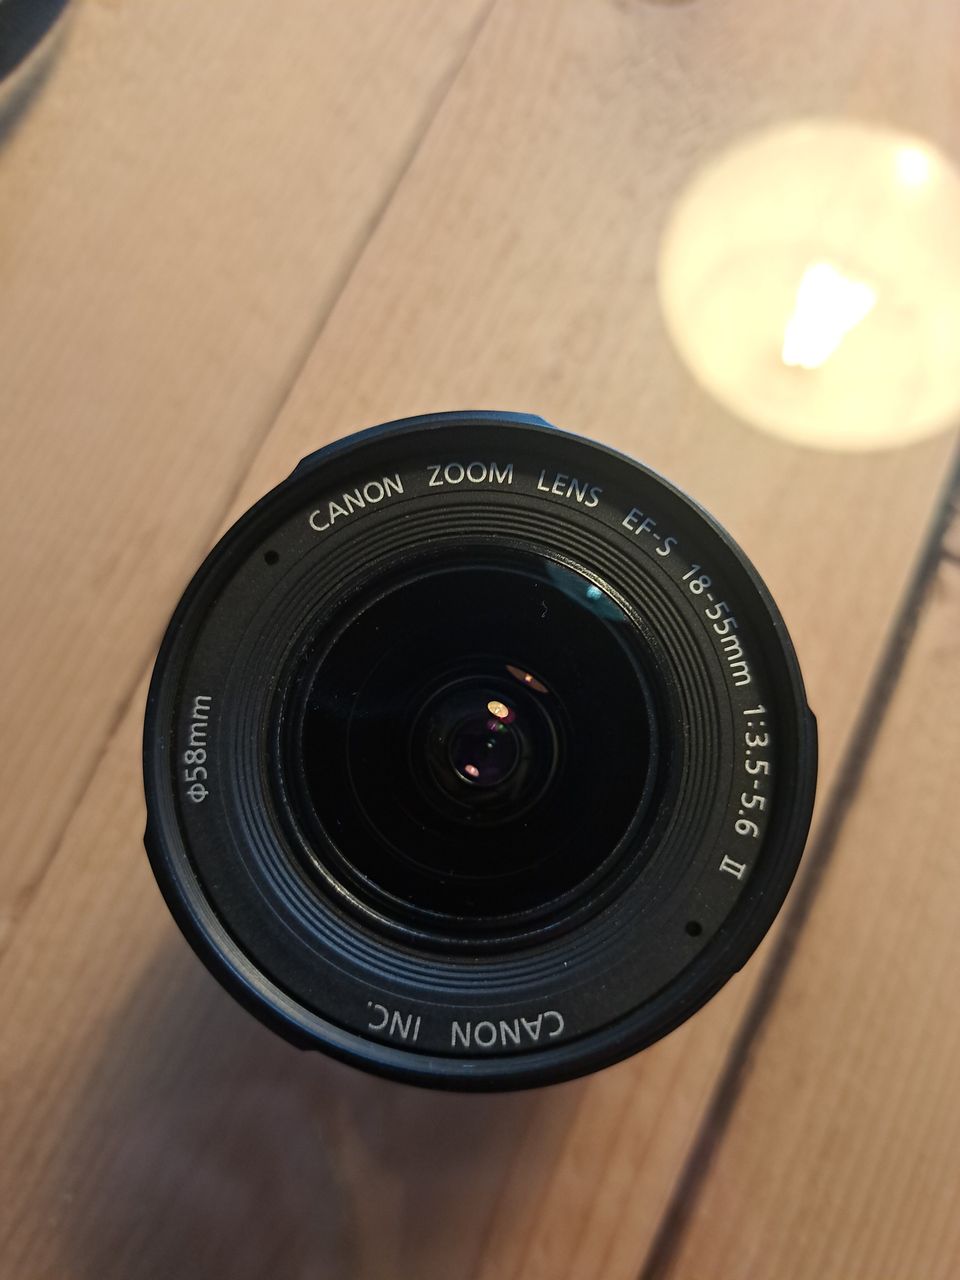 Canon 18-55 mm EFS F 1: 3.5 - 5.6